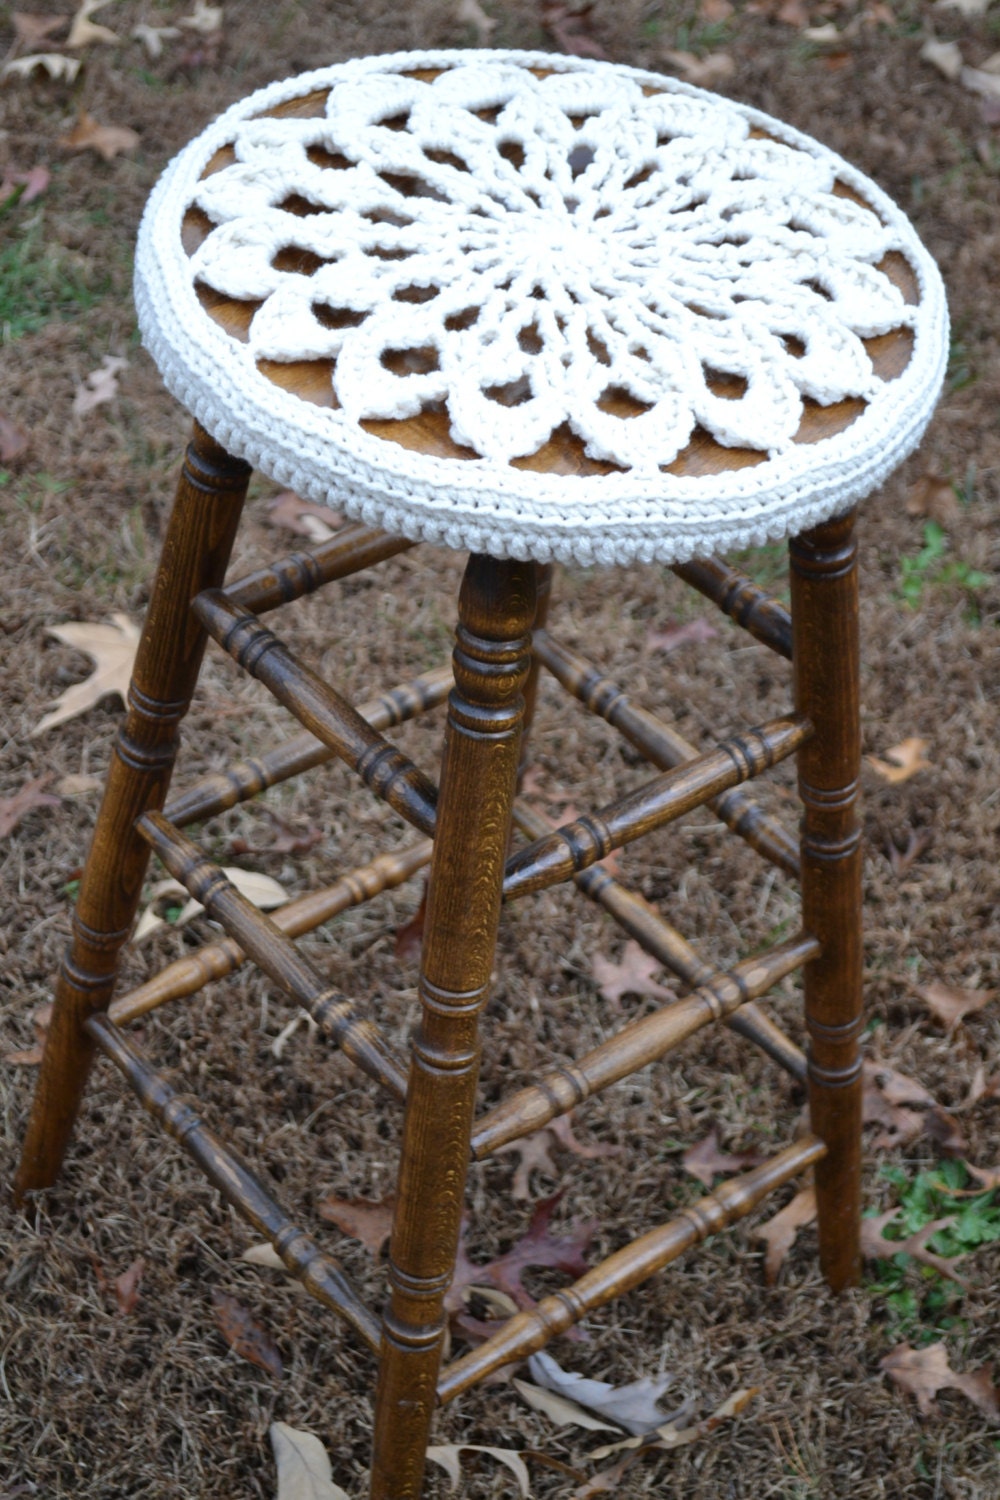 Stool 30" high with Crochet Cover Neutral Doily Granny Square Upcycle Recycle Littlestsister - LittlestSister